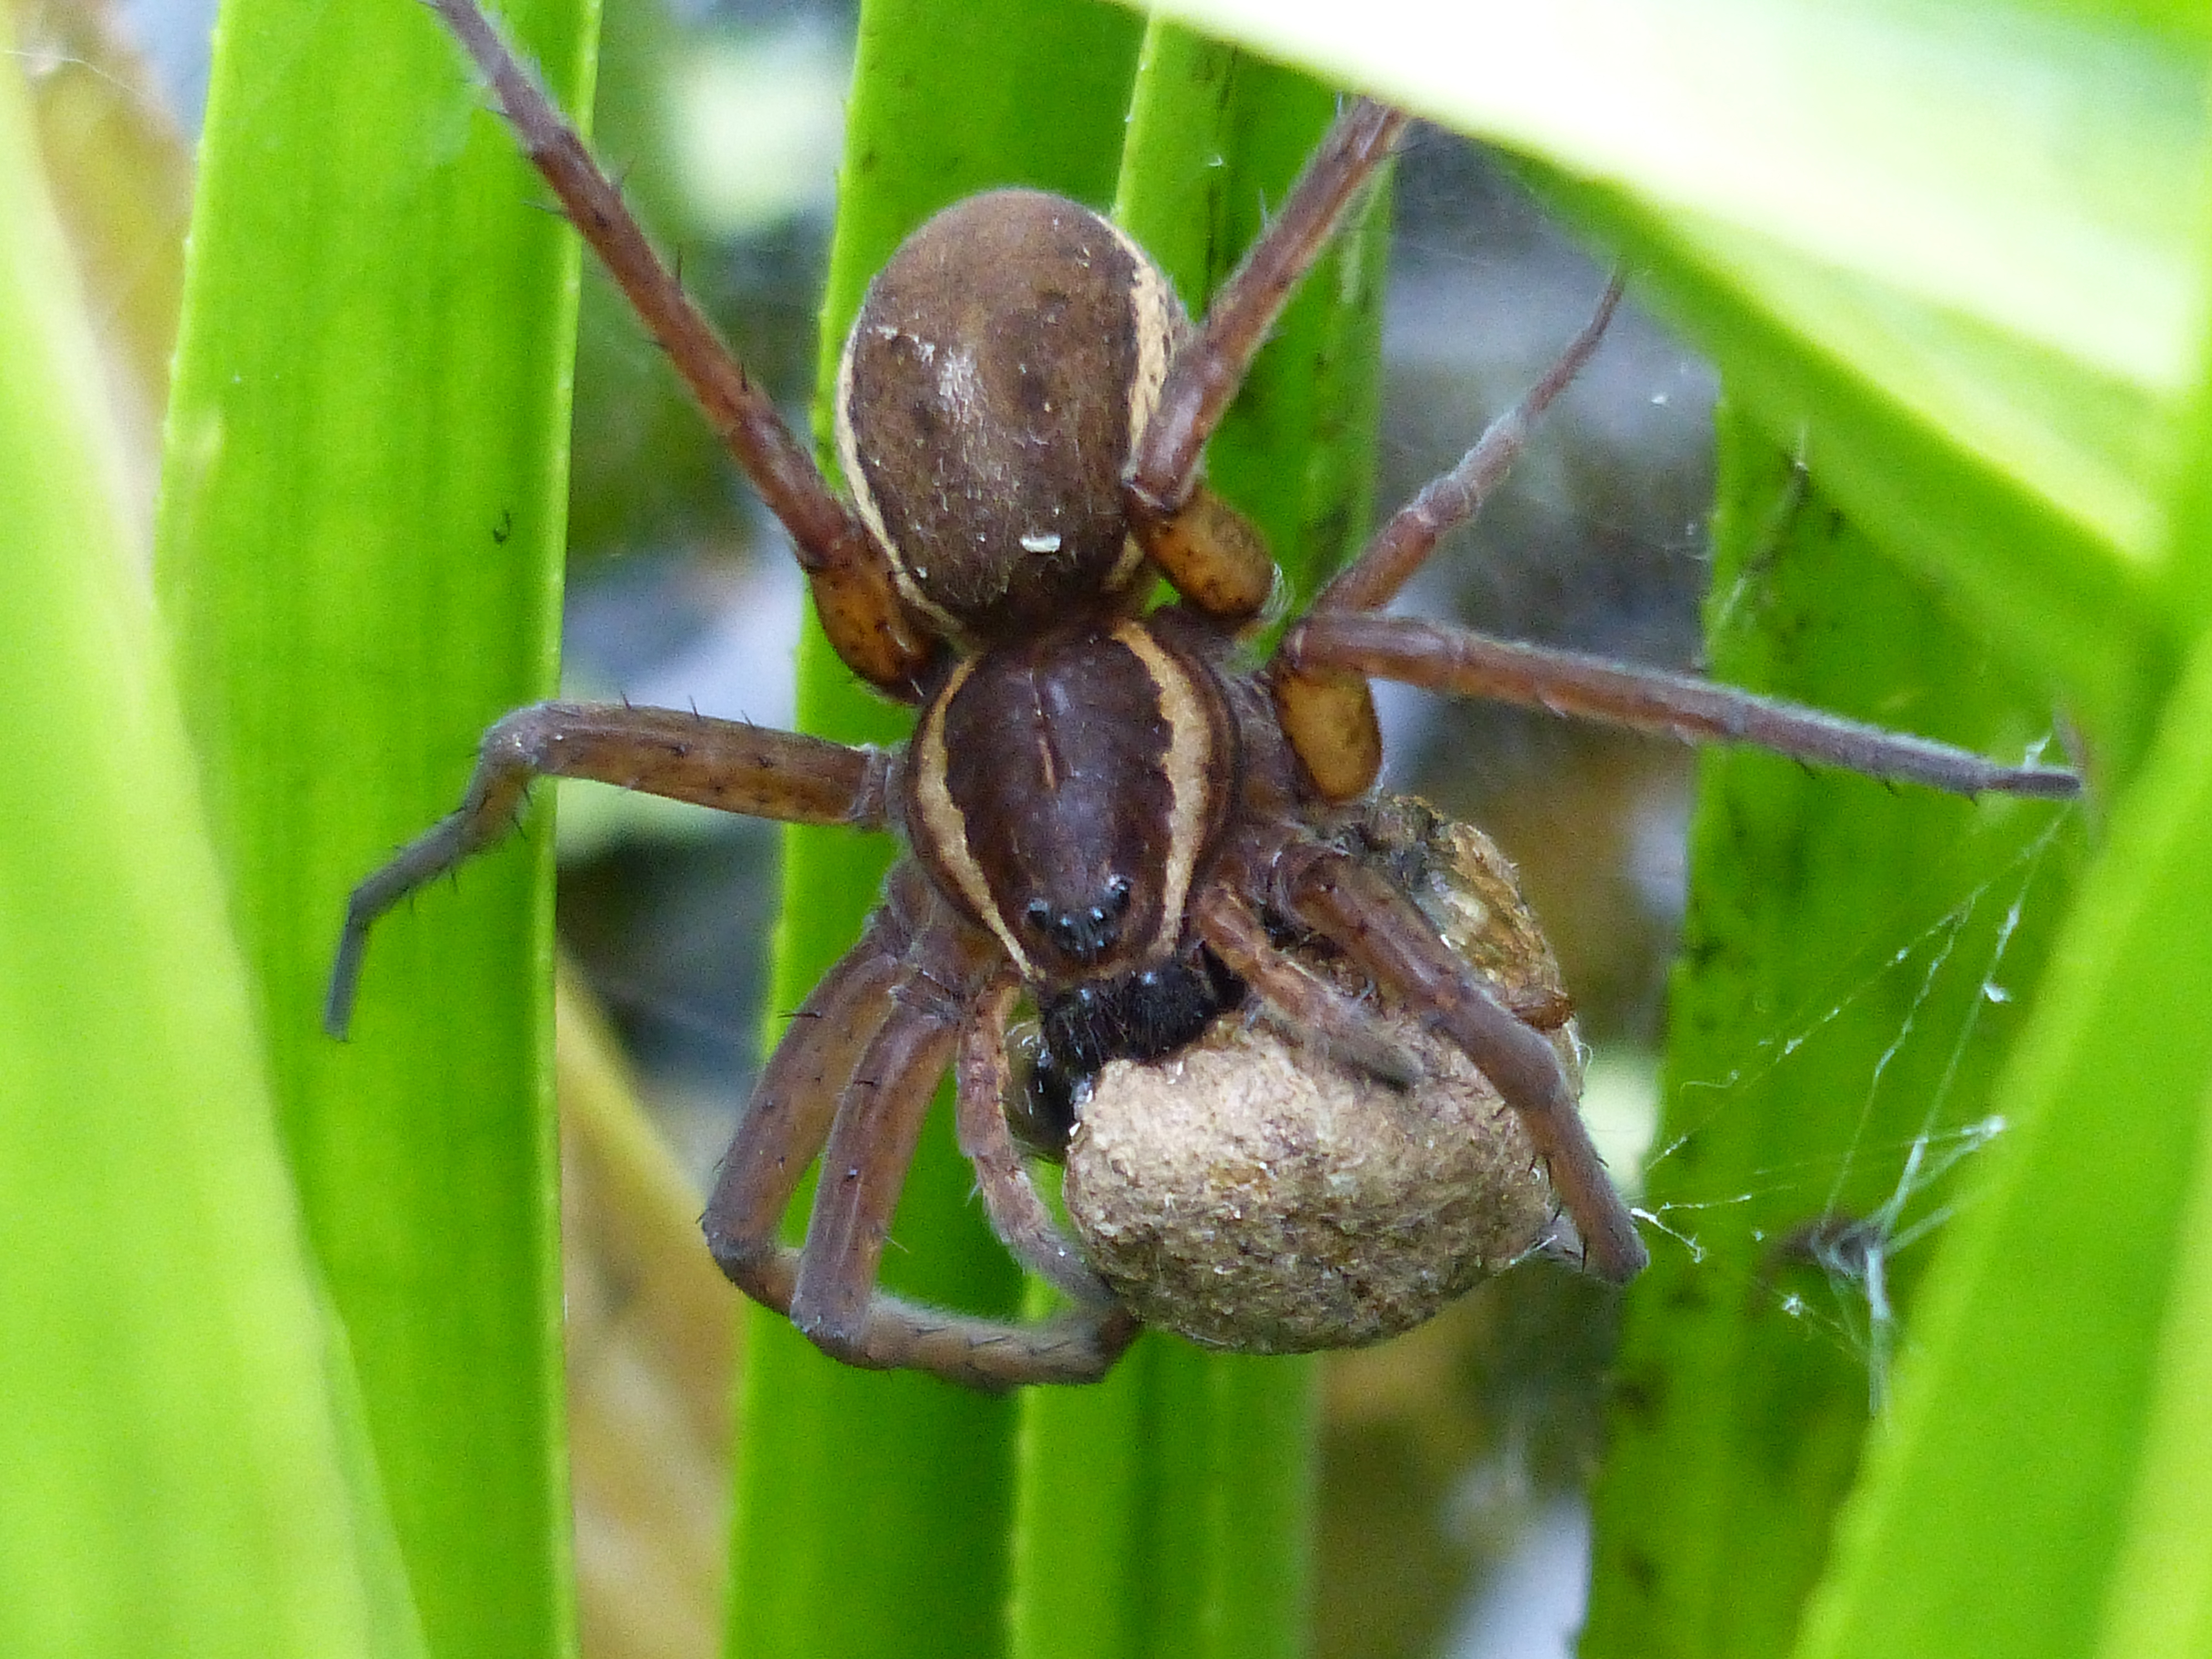 An adult female D. plantarius cannibalising another female and her egg sac